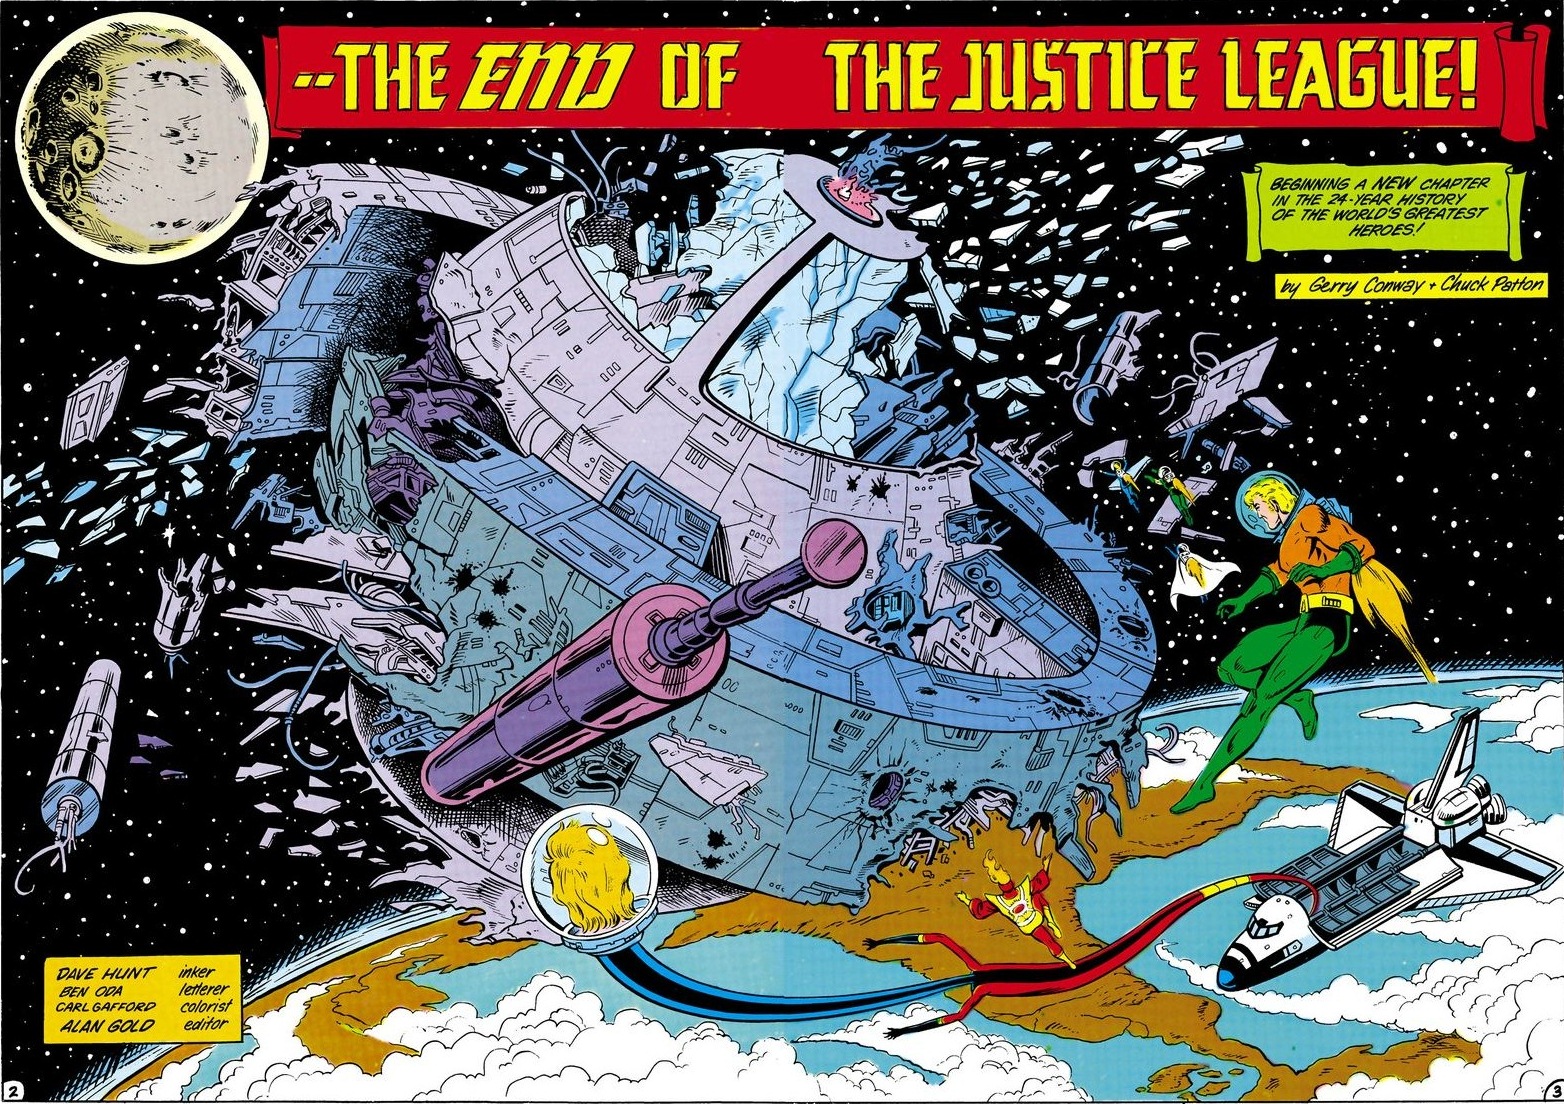 From Justice League of America Annual (Vol. 1) #2 (1984)